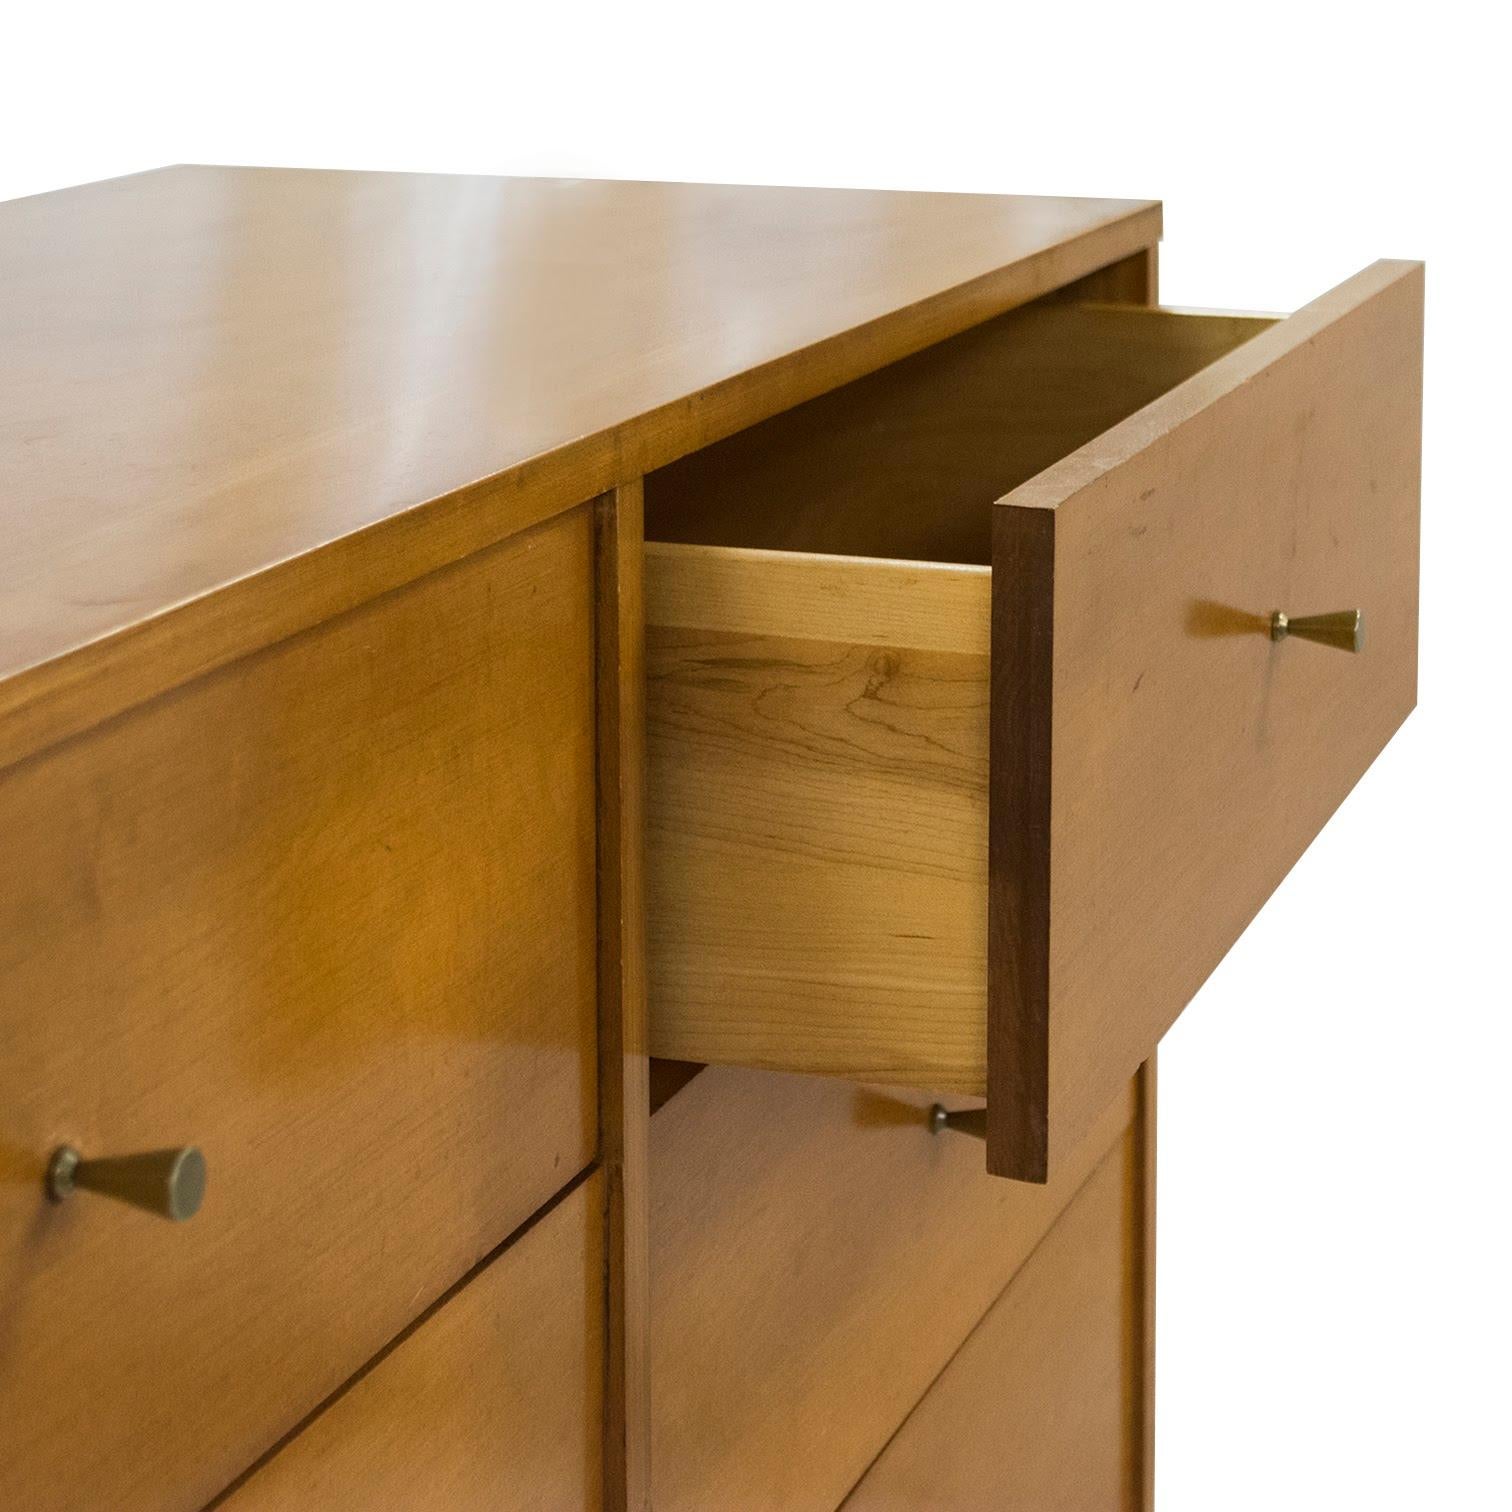 Perfect for apartment living this compact (48in) dresser, designed by the great Paul McCobb in his Planner Group. McCobb, influenced by the English designer Thomas Sheridan used delicate designs featuring tapered legs and well executed